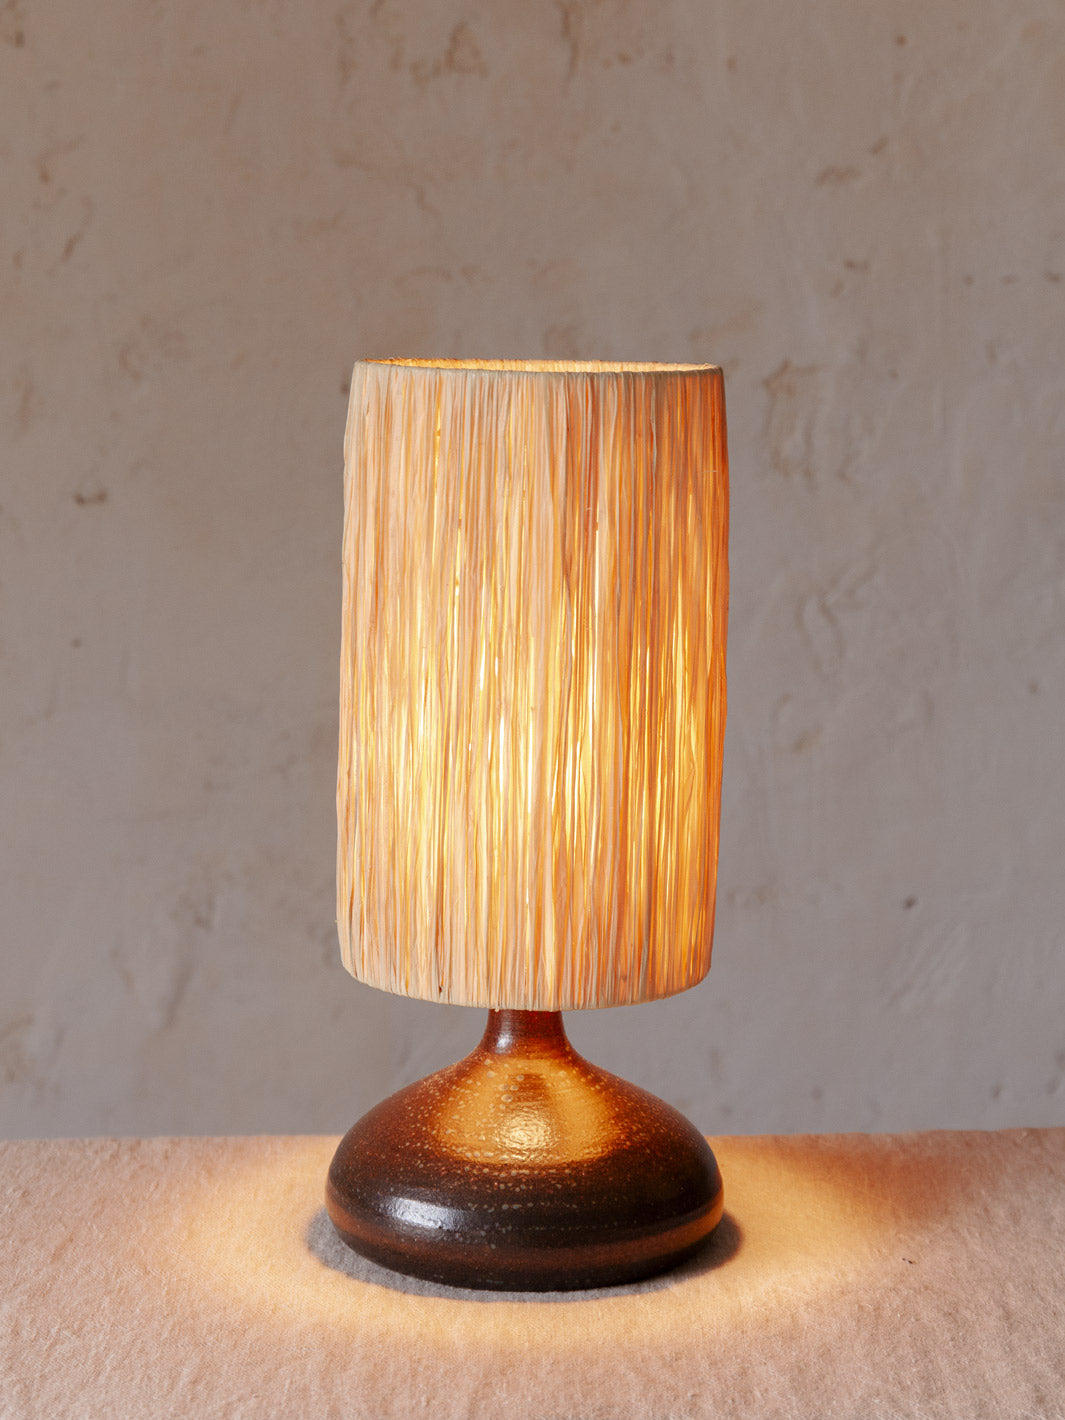 Pair of Fabien Comte lamps from the 70s